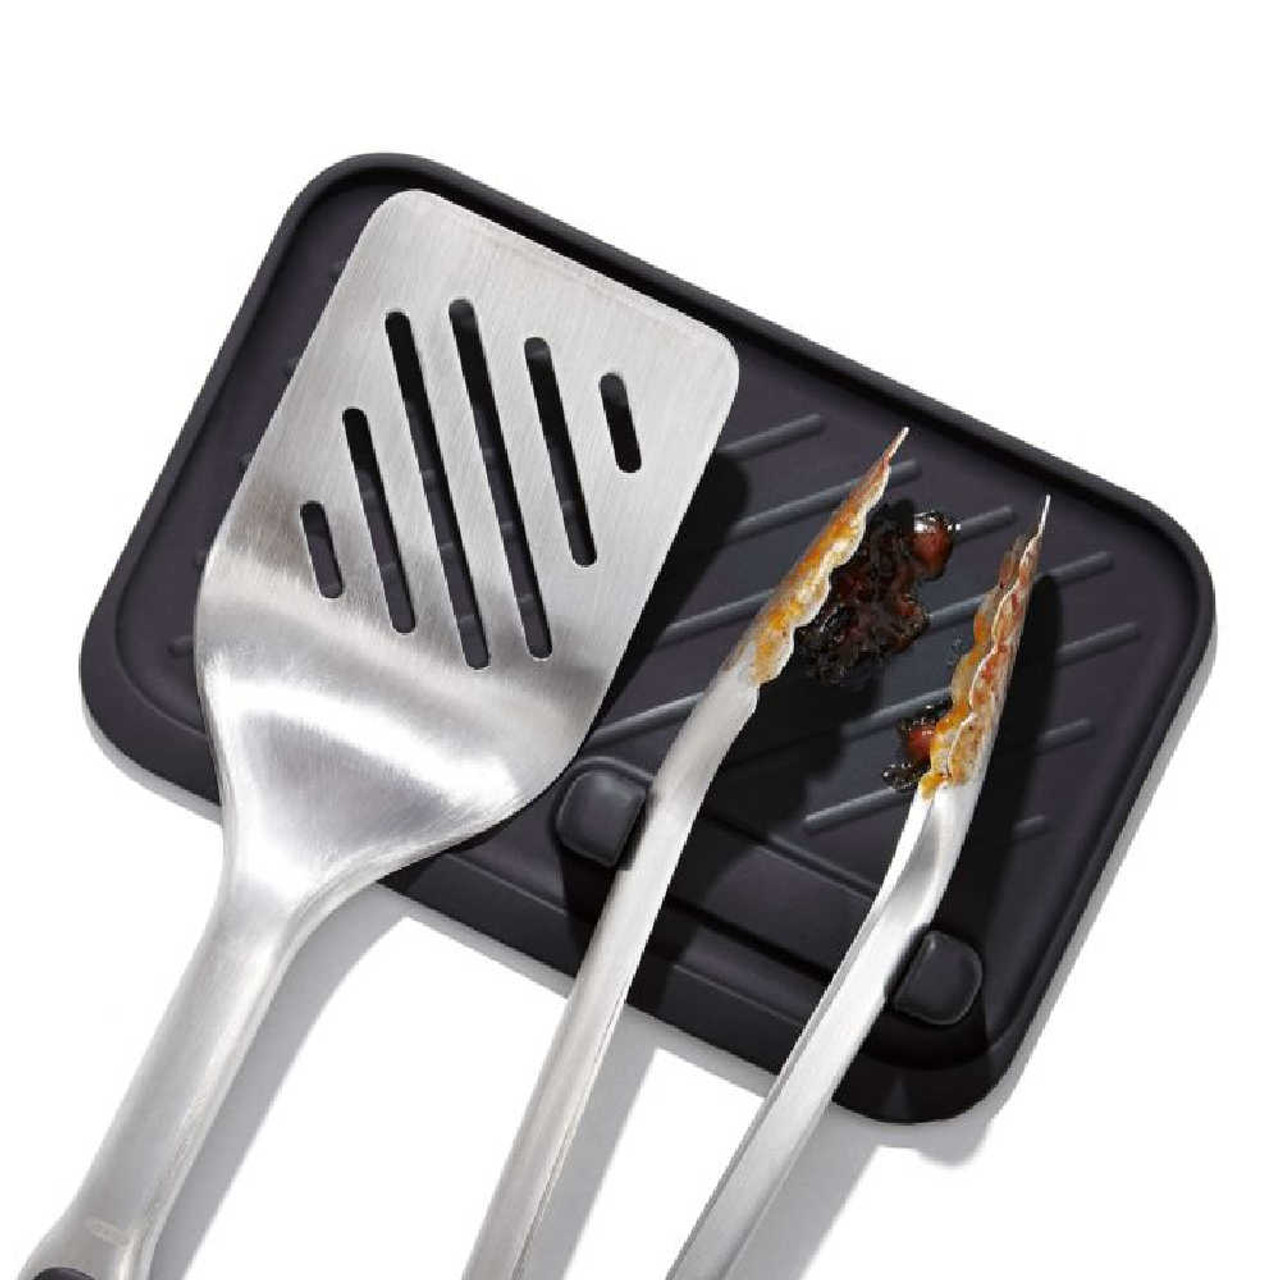 https://cdn11.bigcommerce.com/s-hccytny0od/images/stencil/1280x1280/products/4689/19002/OXO_Good_Grips_3-Piece_Grilling_Set__35711.1651459866.jpg?c=2?imbypass=on